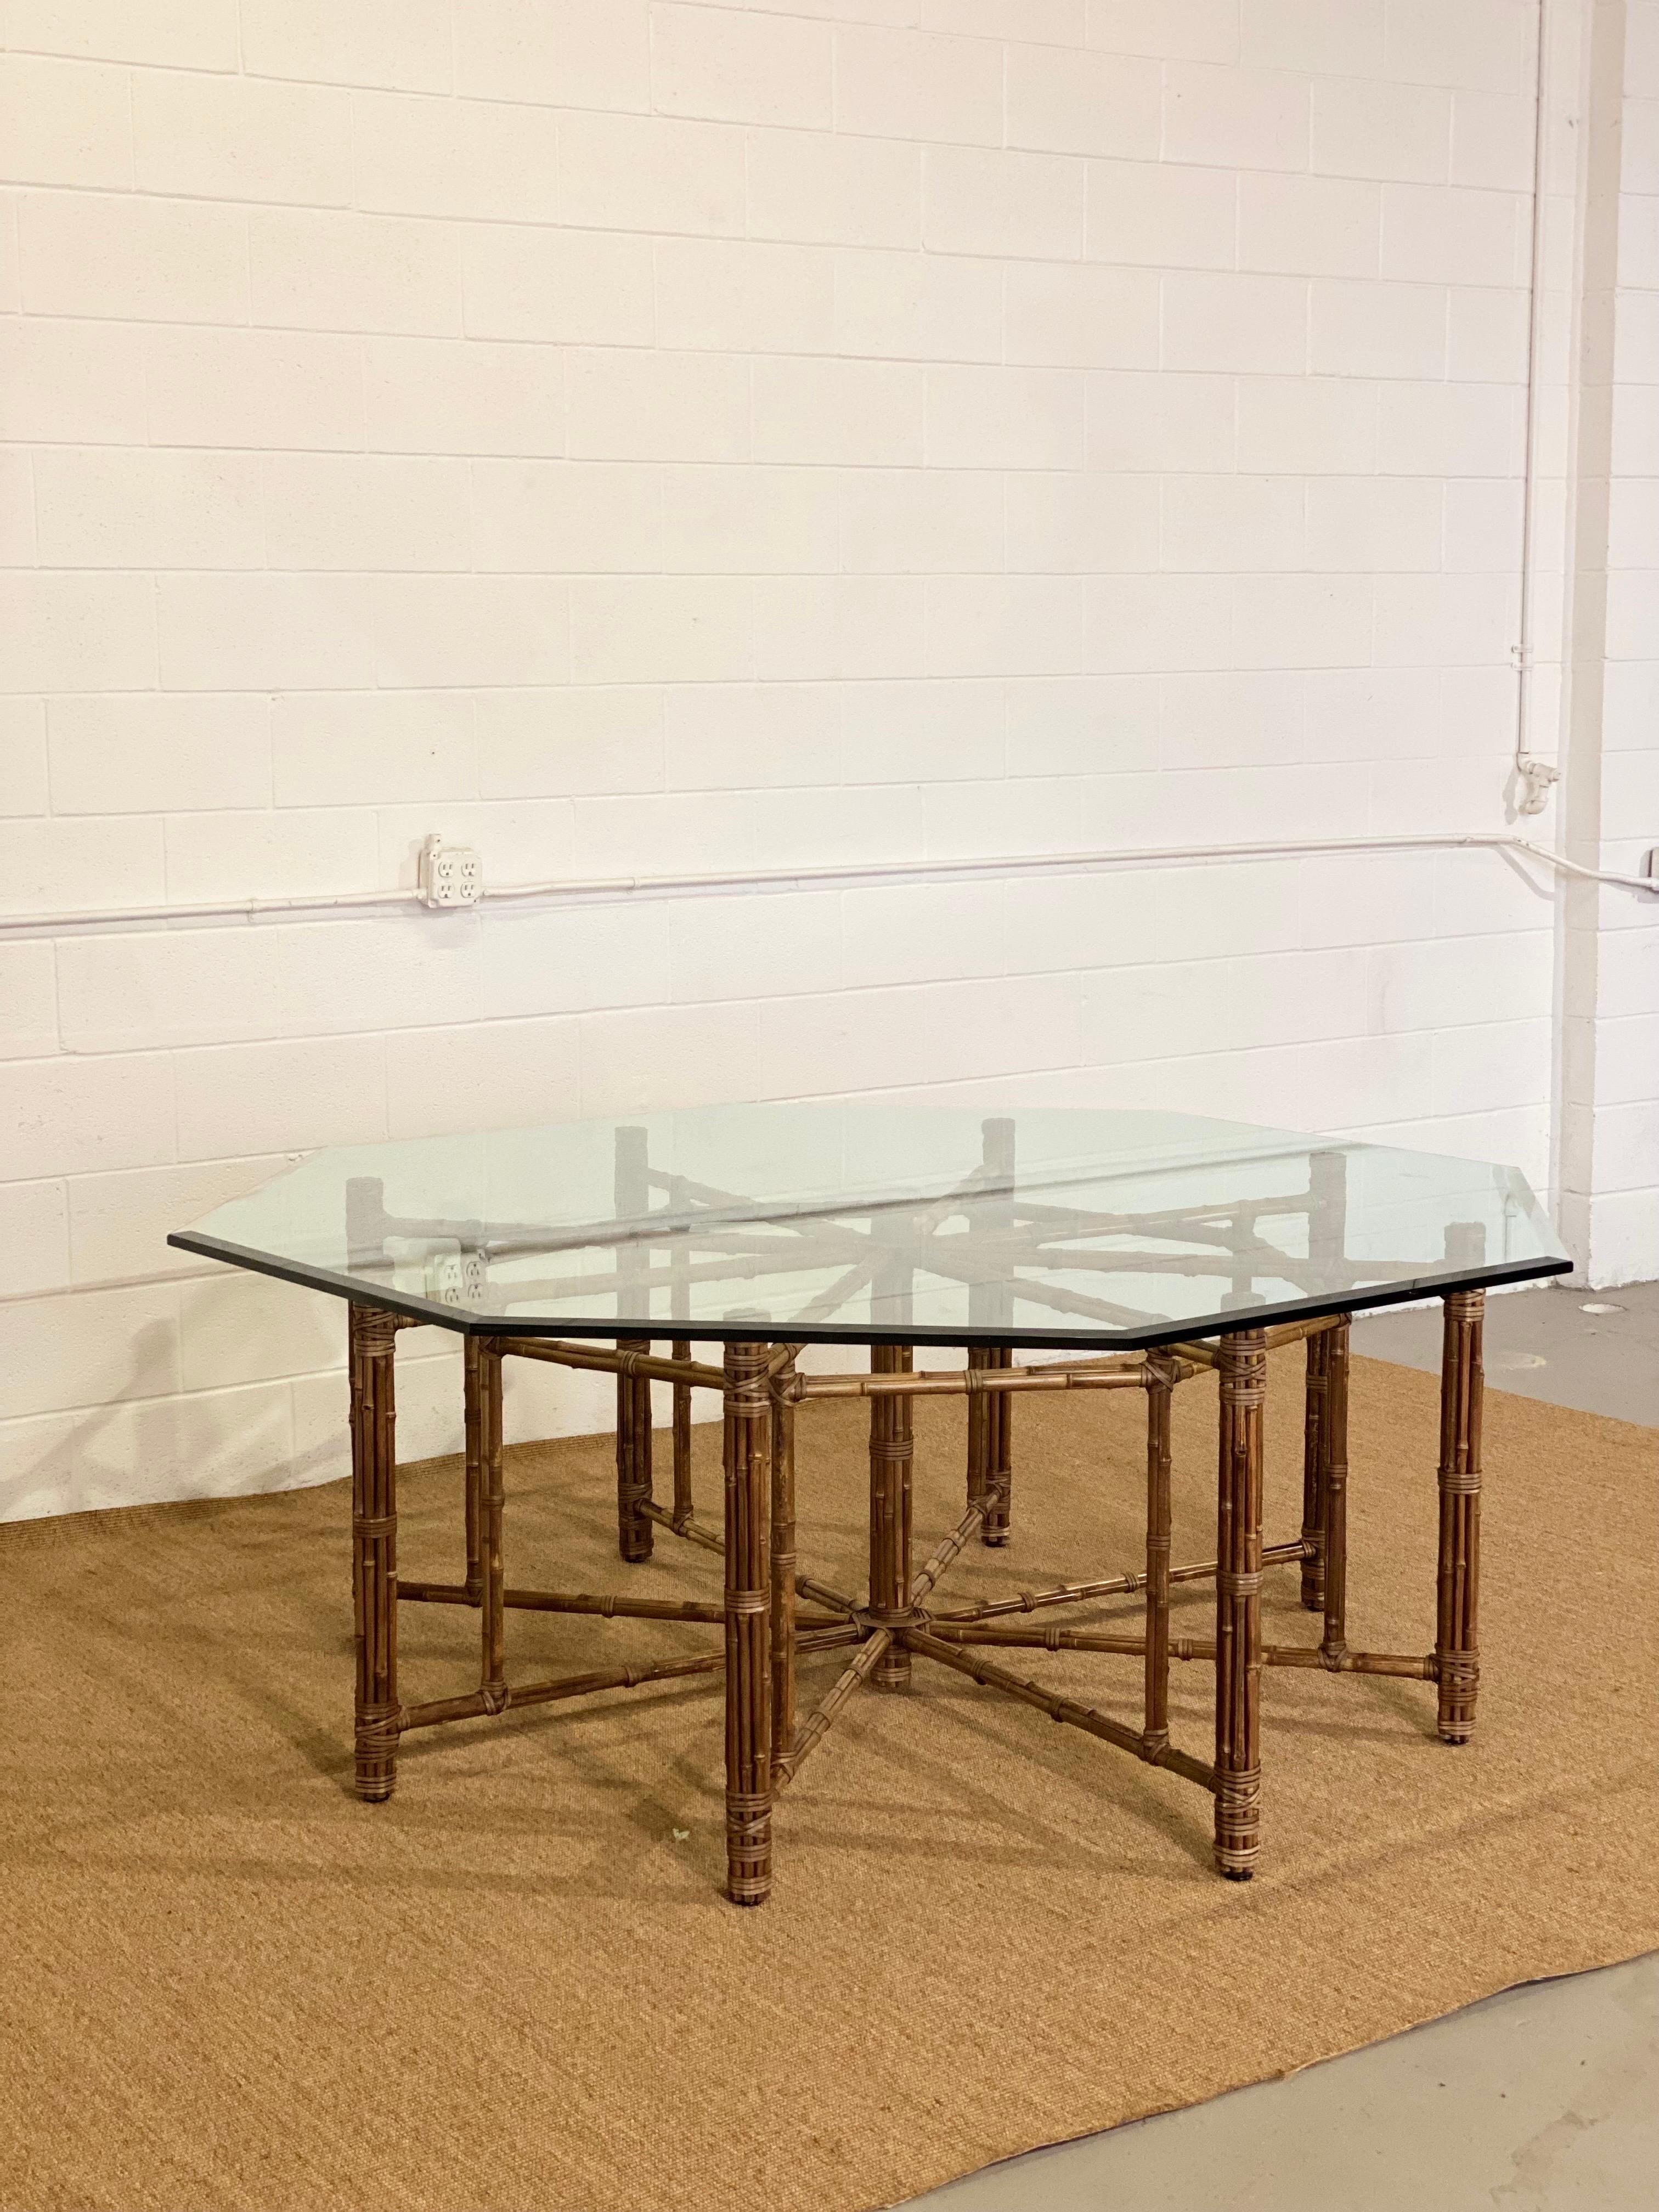 We are very pleased to offer an organic, modern-looking dining table designed by John McGuire, circa the 1990s. McGuire designs mix incredible materials, forms, and texture to create both chic and timeless furniture; moreover, his brand has an